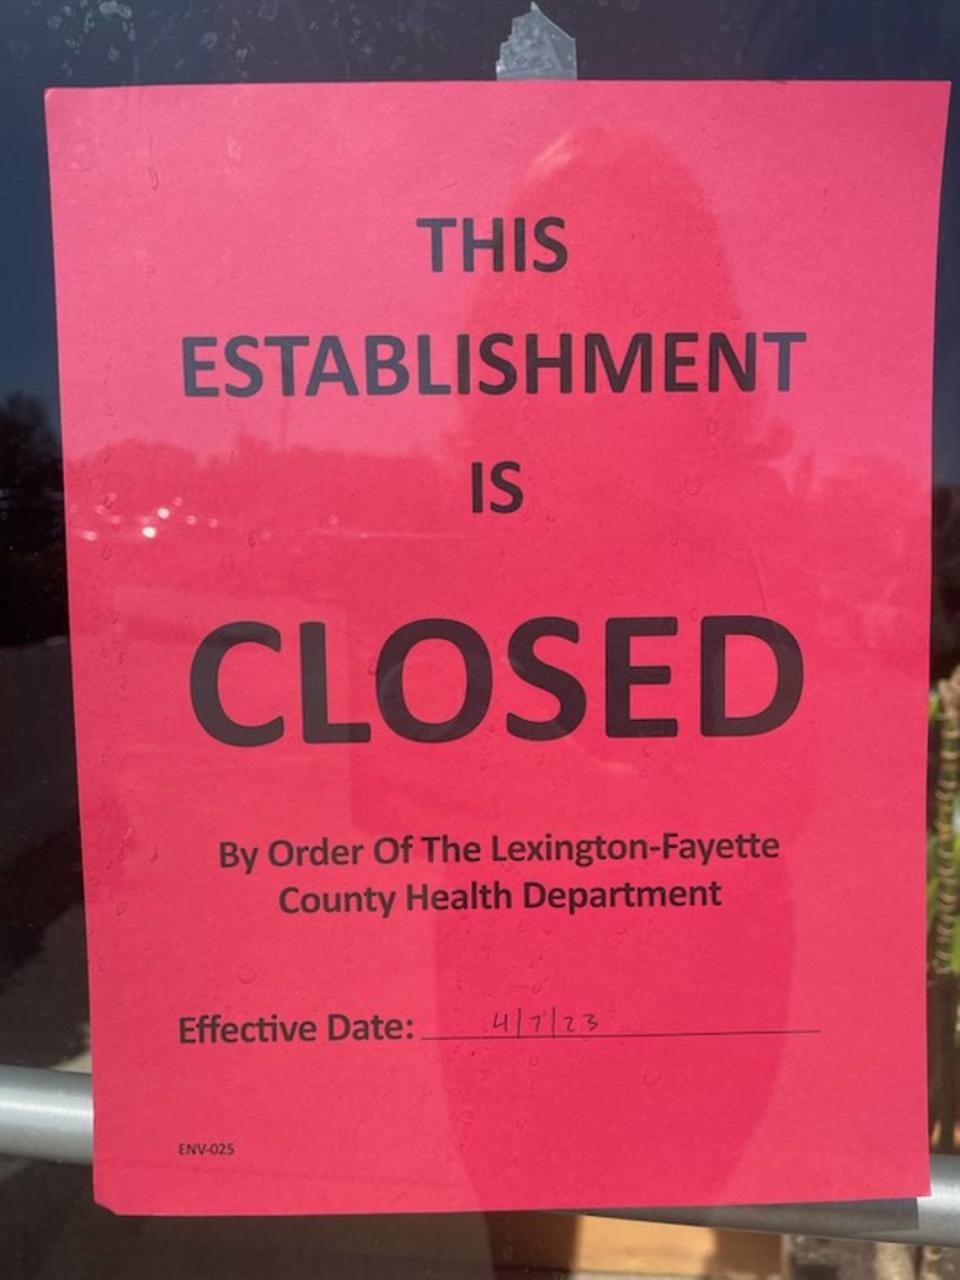 A notice on the door of Jin Jin Chinese Restaurant in Chinoe shopping center says it has been closed by the Lexington Fayette County Health Department.